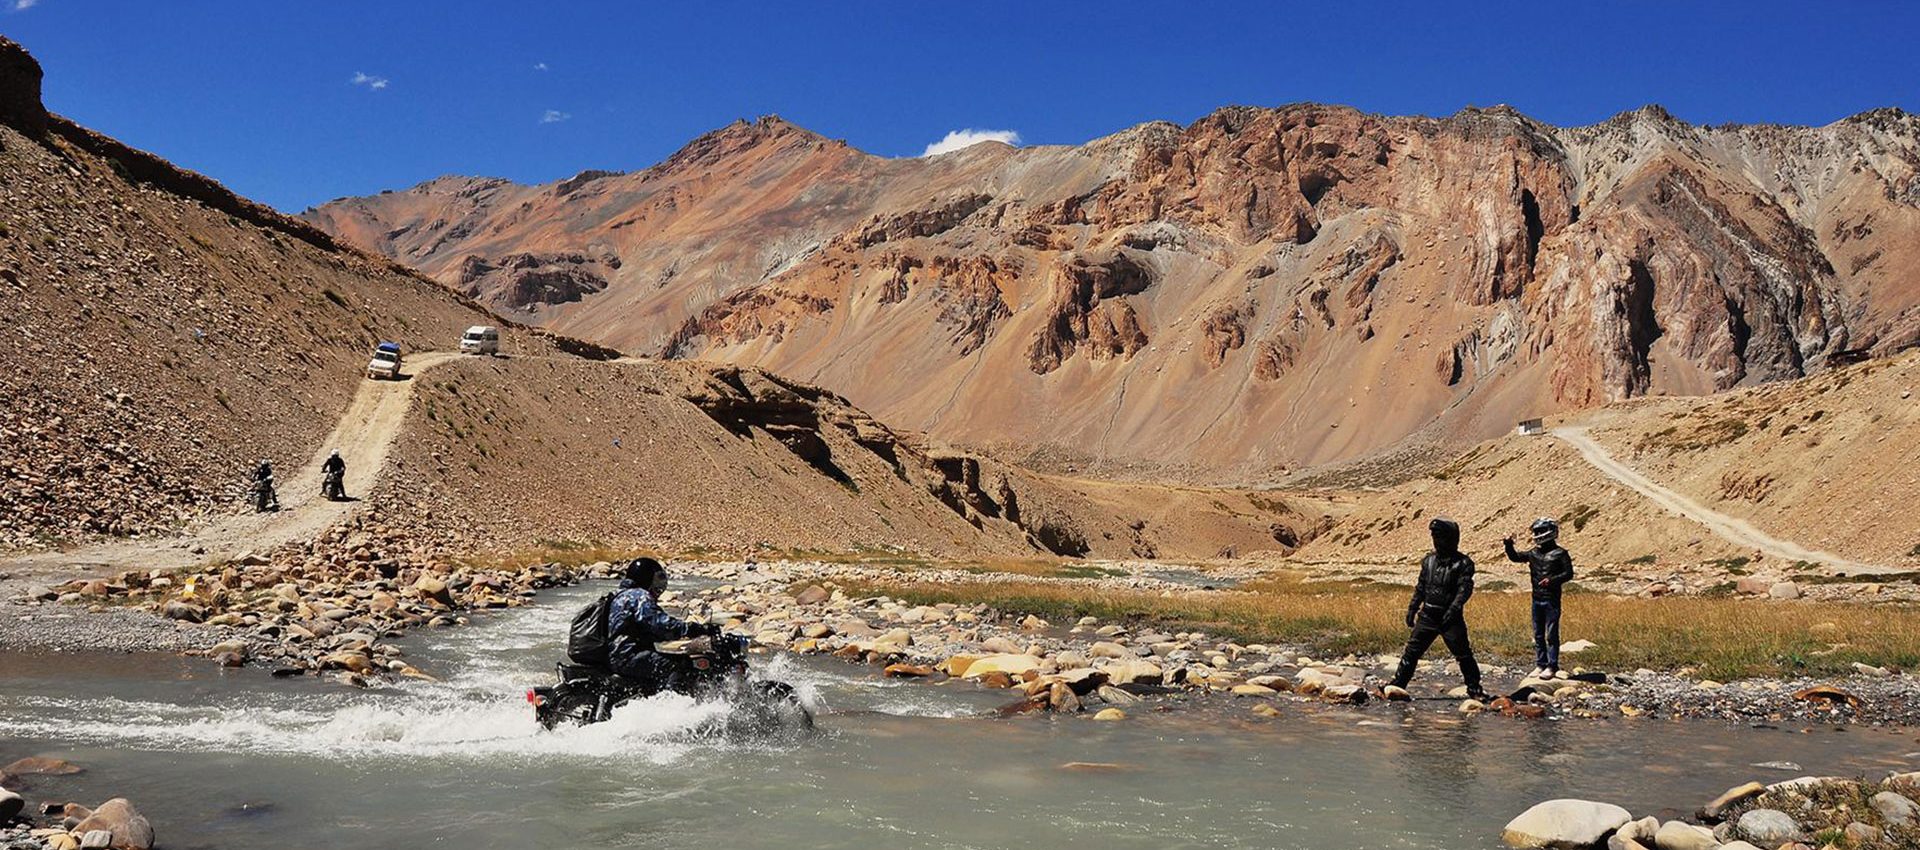 One of the toughest river crossings of the trip, but it's also a lot of fun.